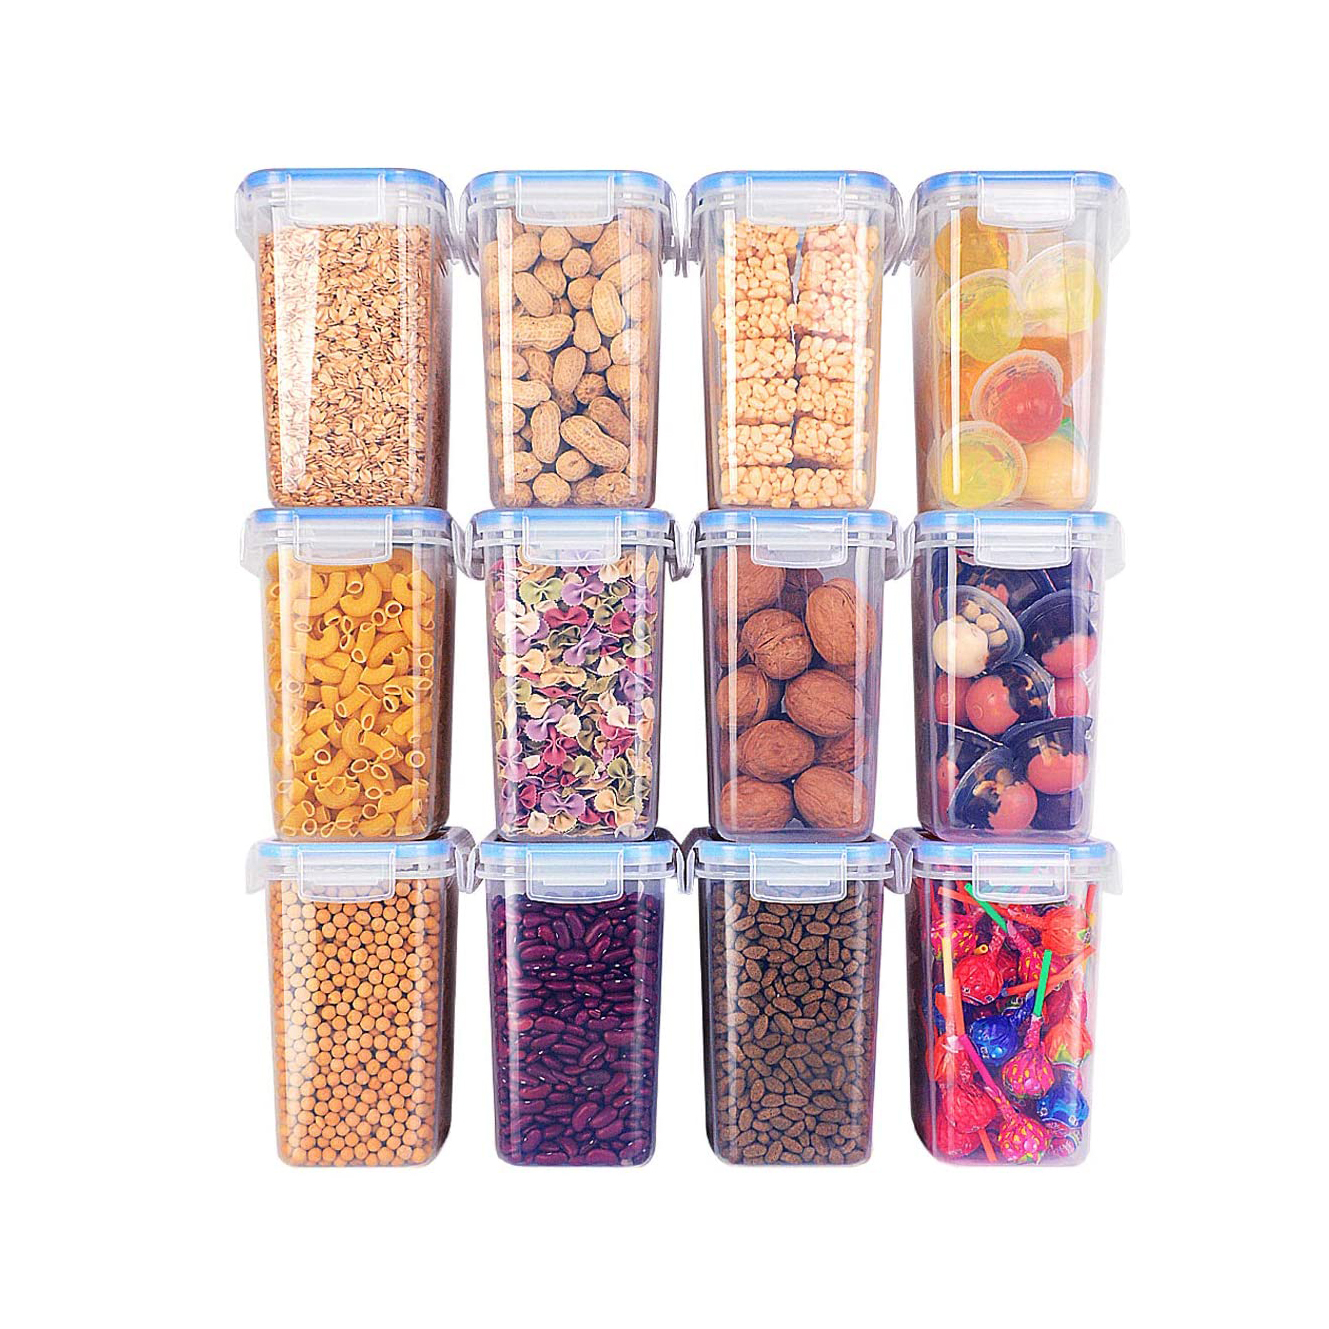 BPA Free Airtight Kitchen Pantry Food Storage Containers